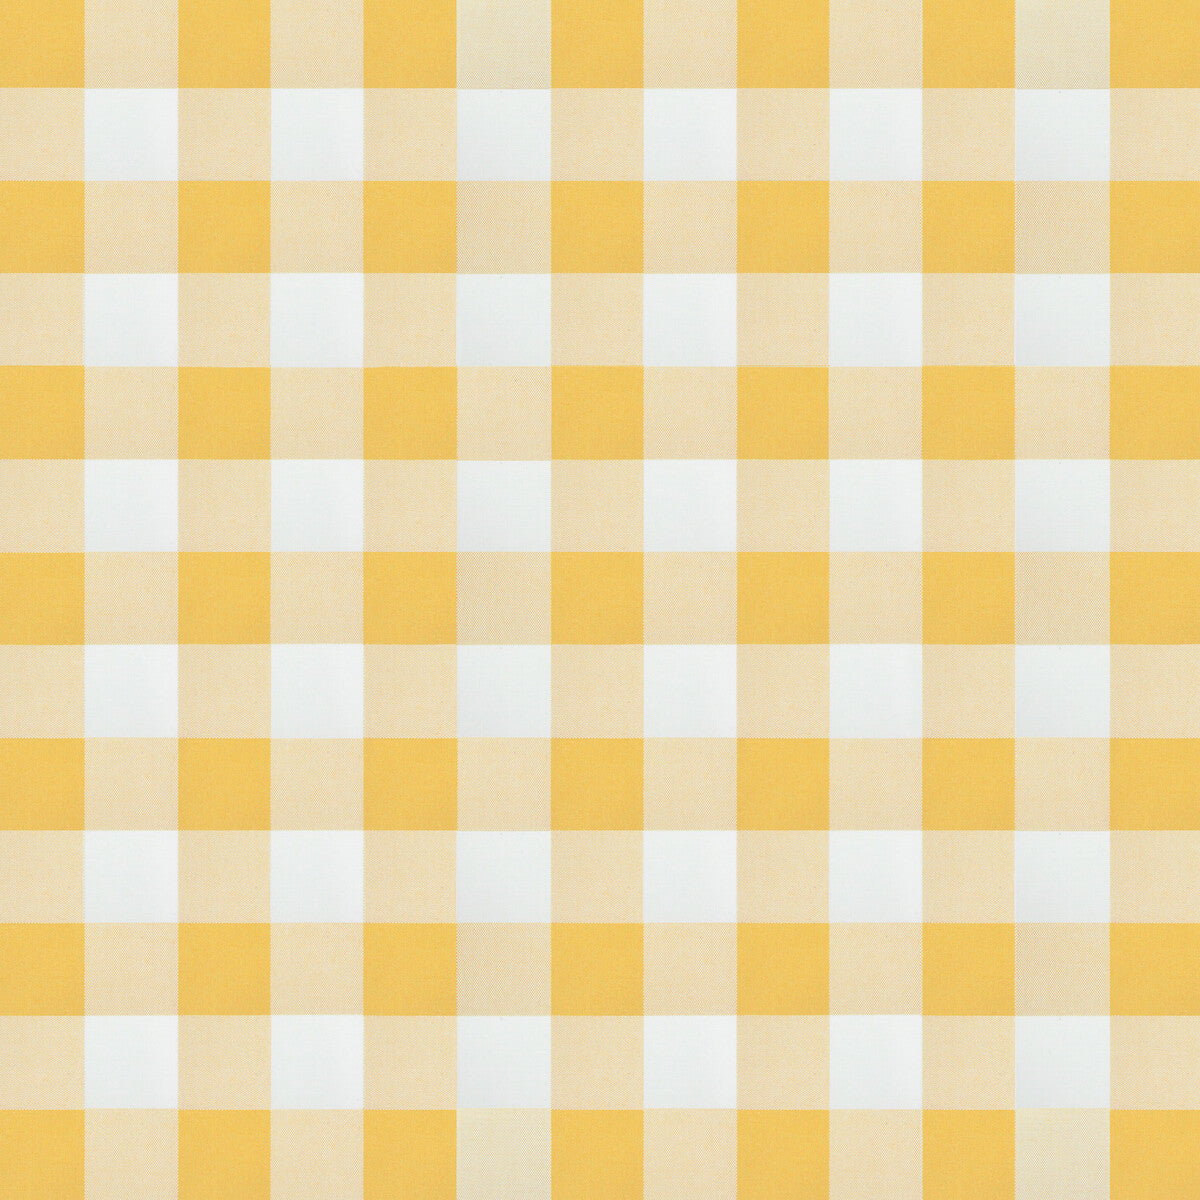 Deia fabric in amarillo color - pattern GDT5685.008.0 - by Gaston y Daniela in the Gaston Maiorica collection